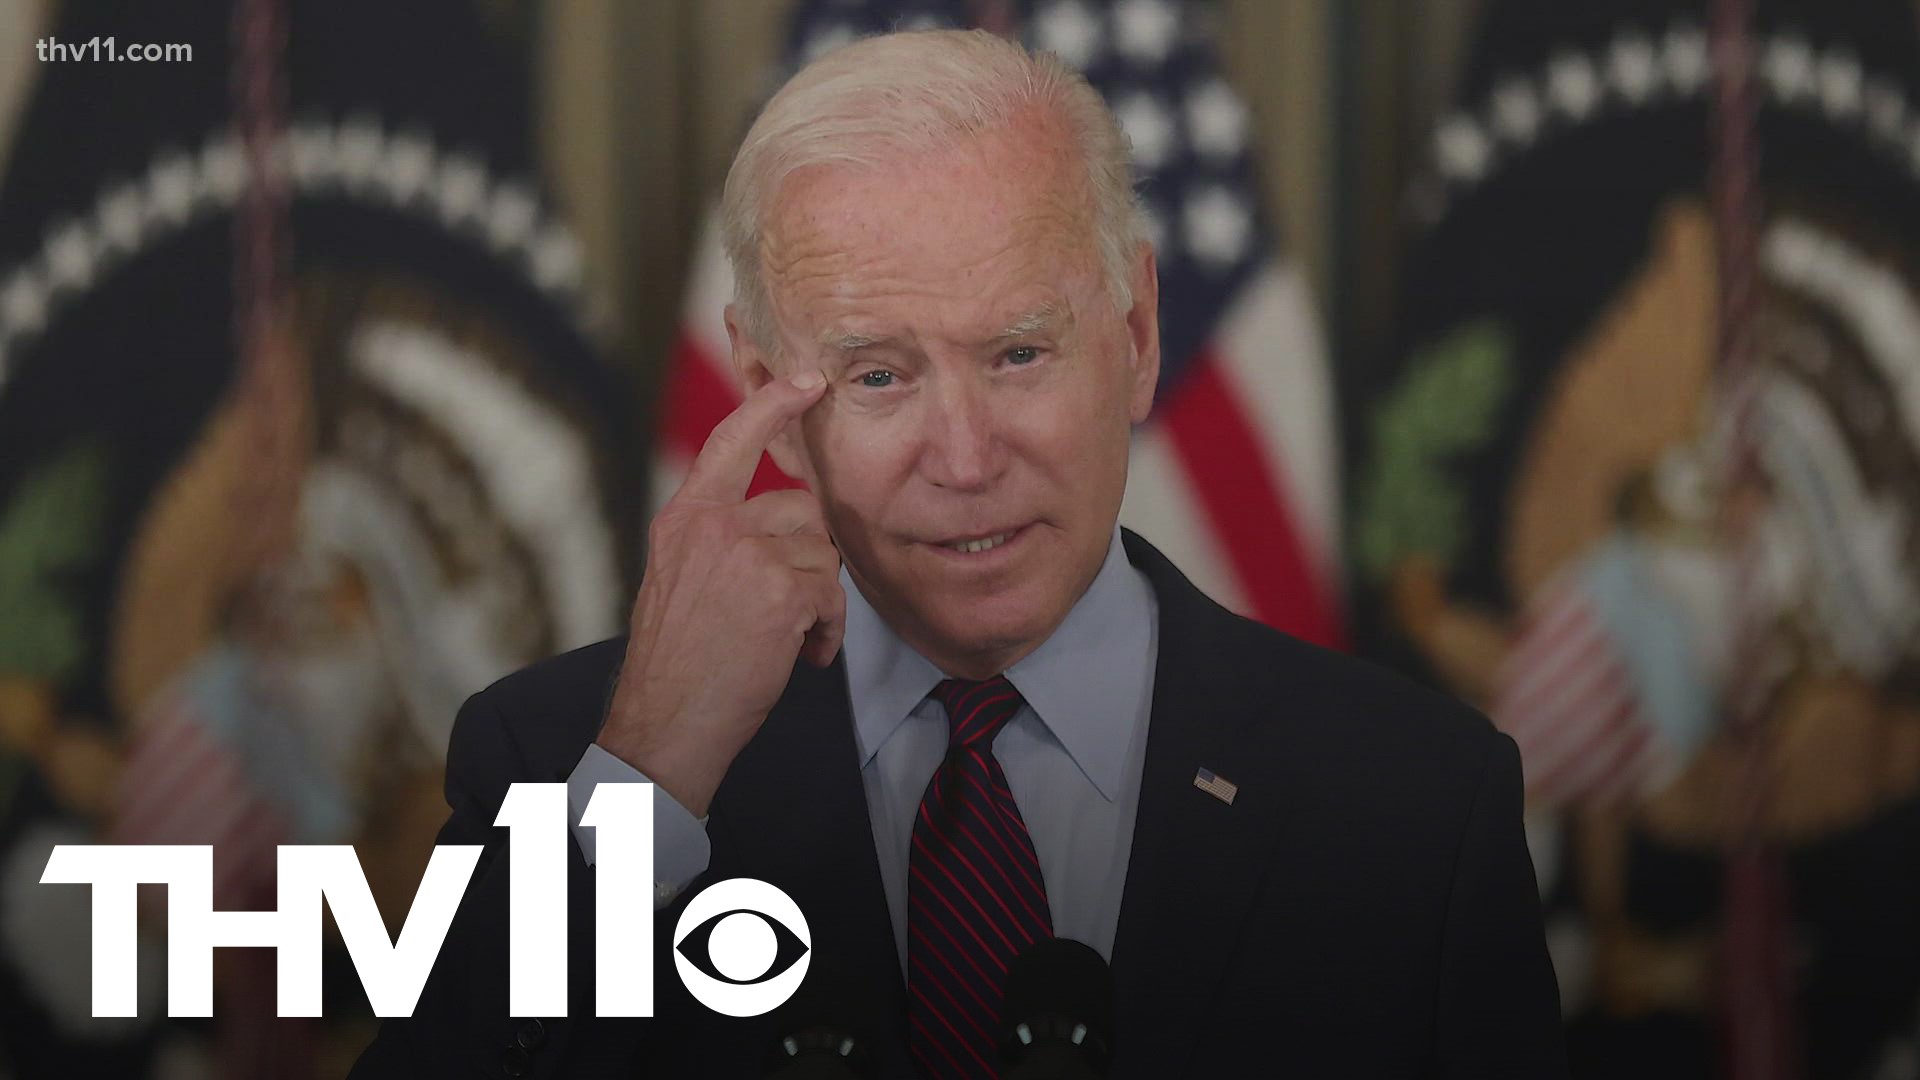 President Biden addressed the Democratic National Committee Saturday, alerting them that the party's infighting could harm their chances in upcoming elections.